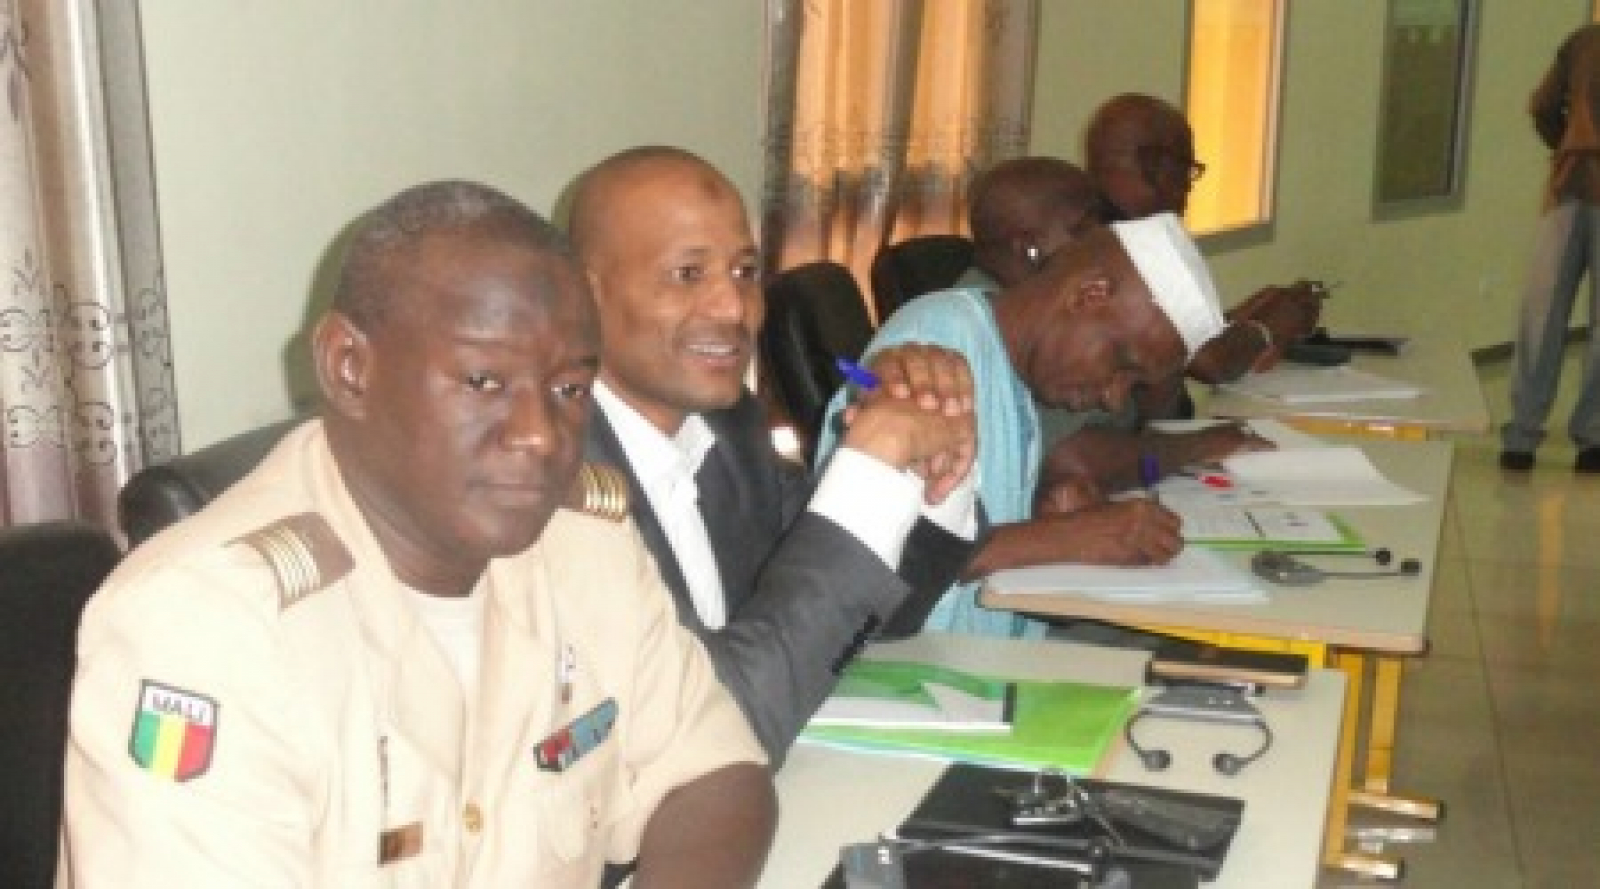 NDI Convenes Malian Authorities to Promote Coordinated Response to National Security Challenges